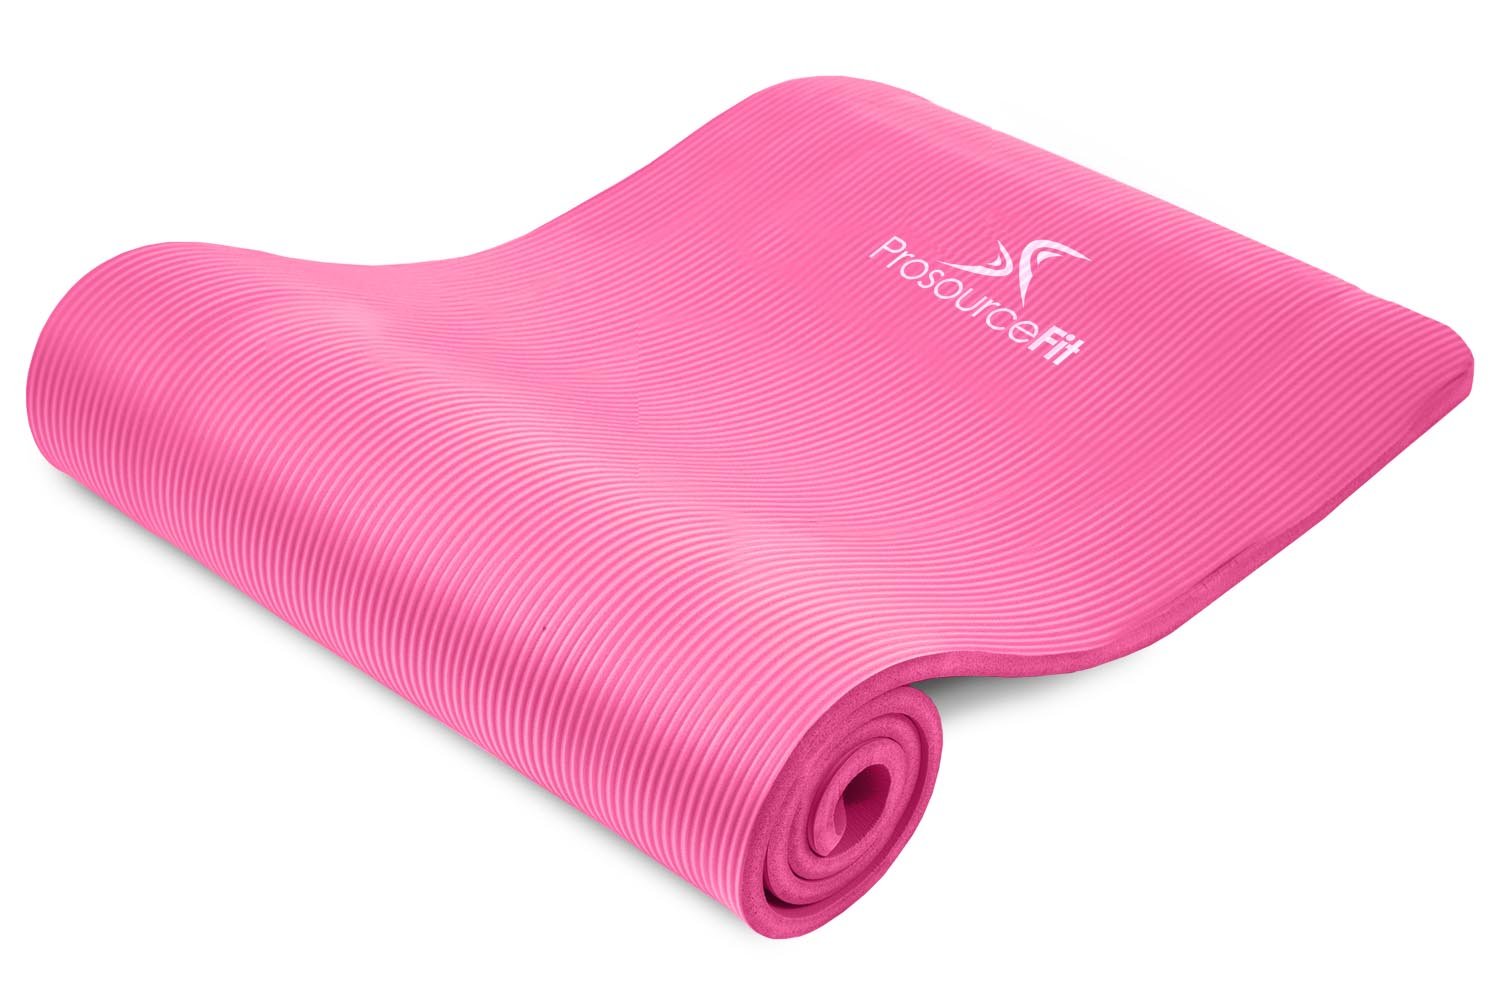 HTAIGUO All-Purpose Pilates and Floor Exercises Mat 1/4 Inch Thick